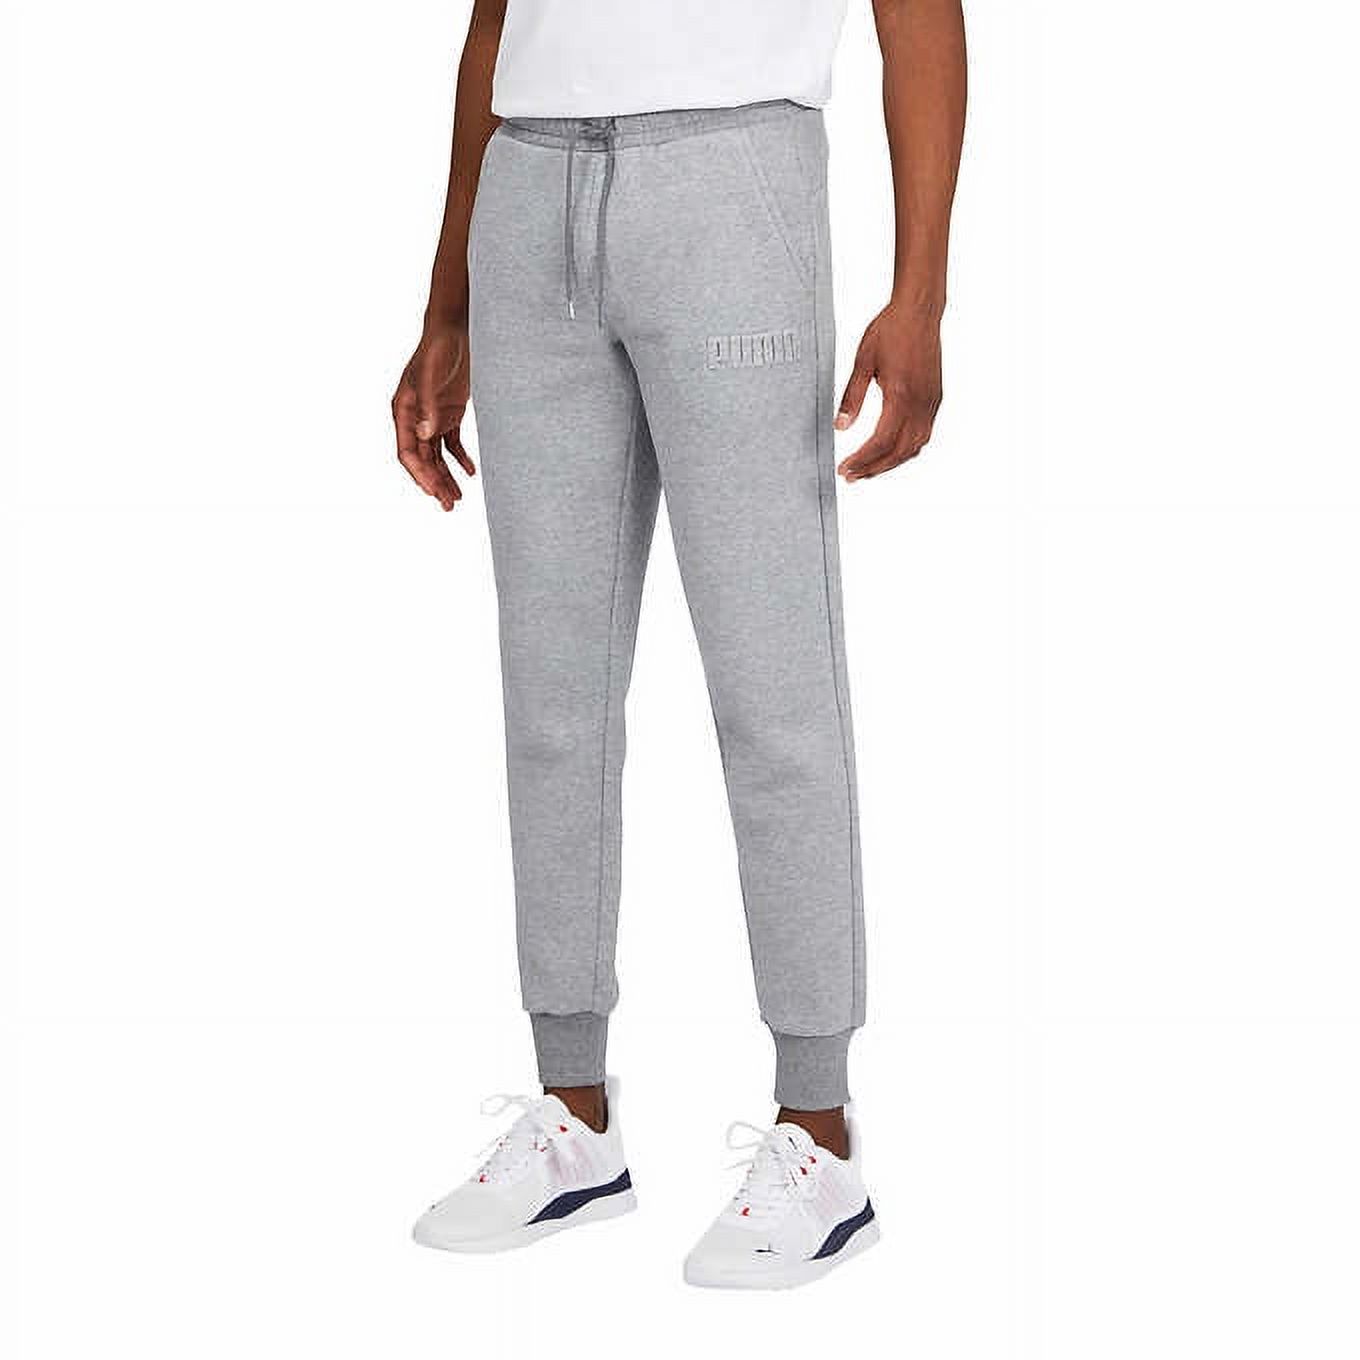 Puma Men's Fleece Lined Tapered Leg Cuffed Athletic Sweatpants (Gray, X-Large) - image 2 of 4